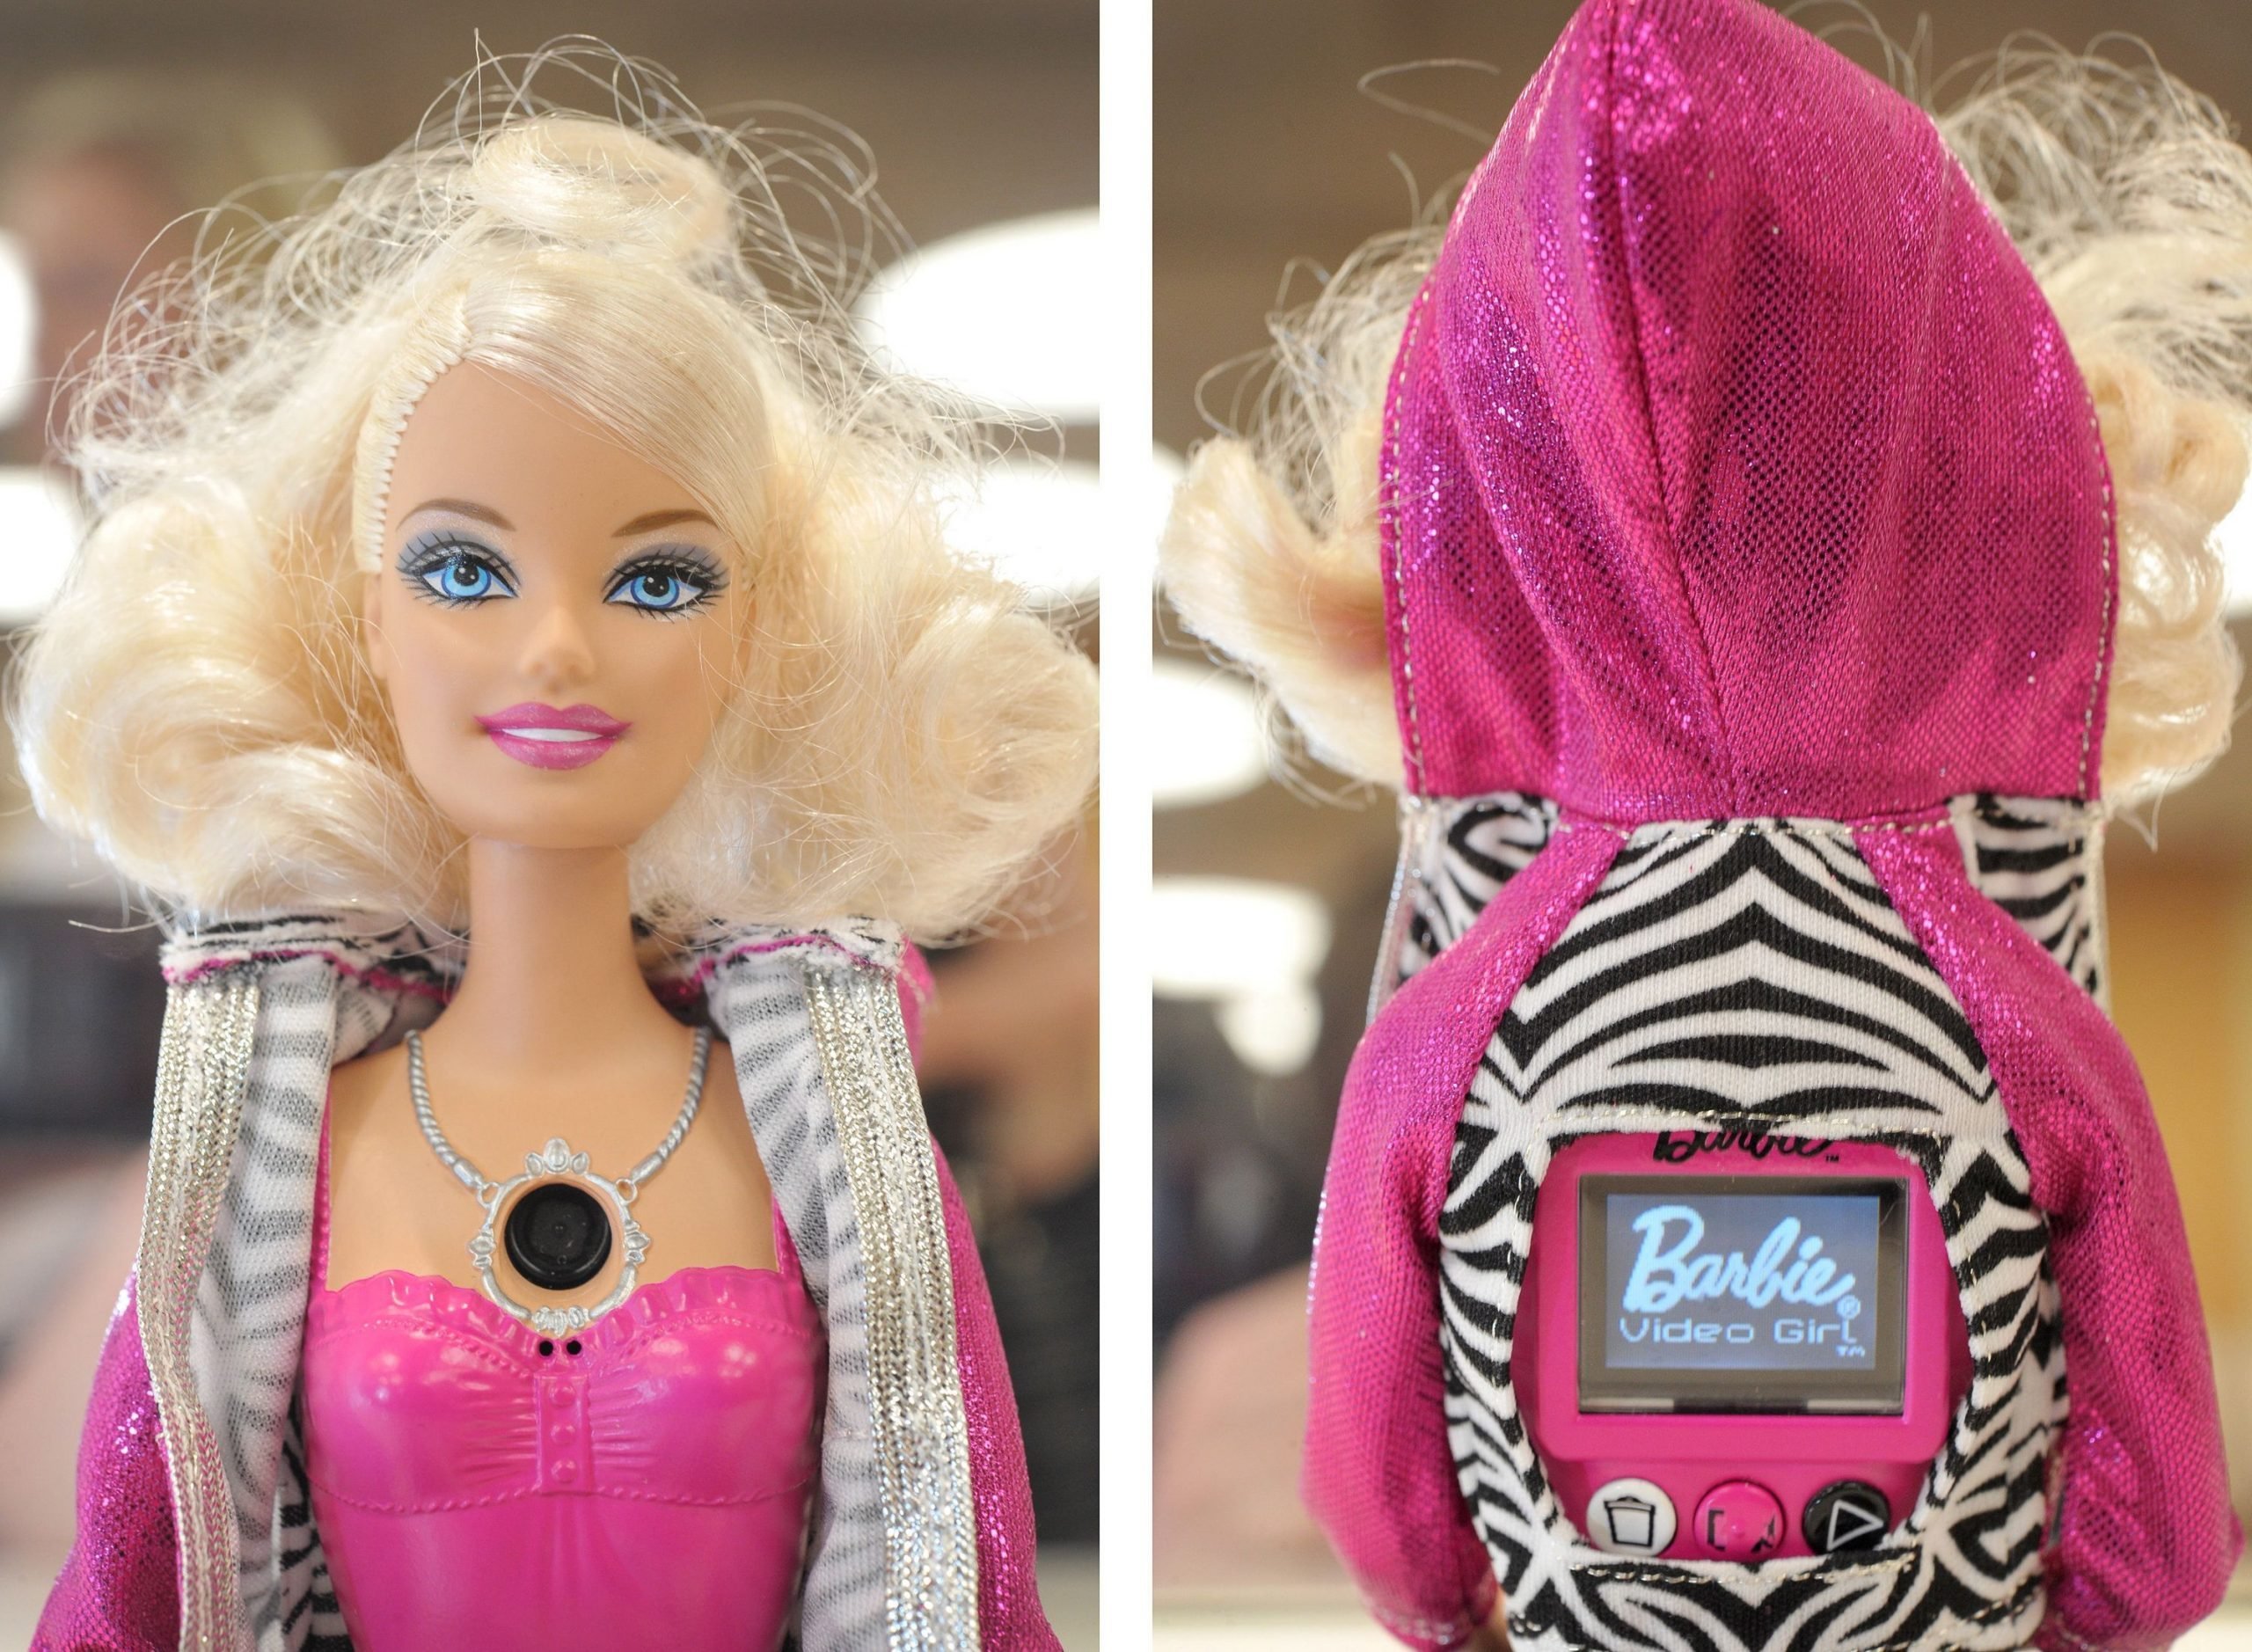 Giving Barbie a date. Also, is there anyone out there who DIDN'T